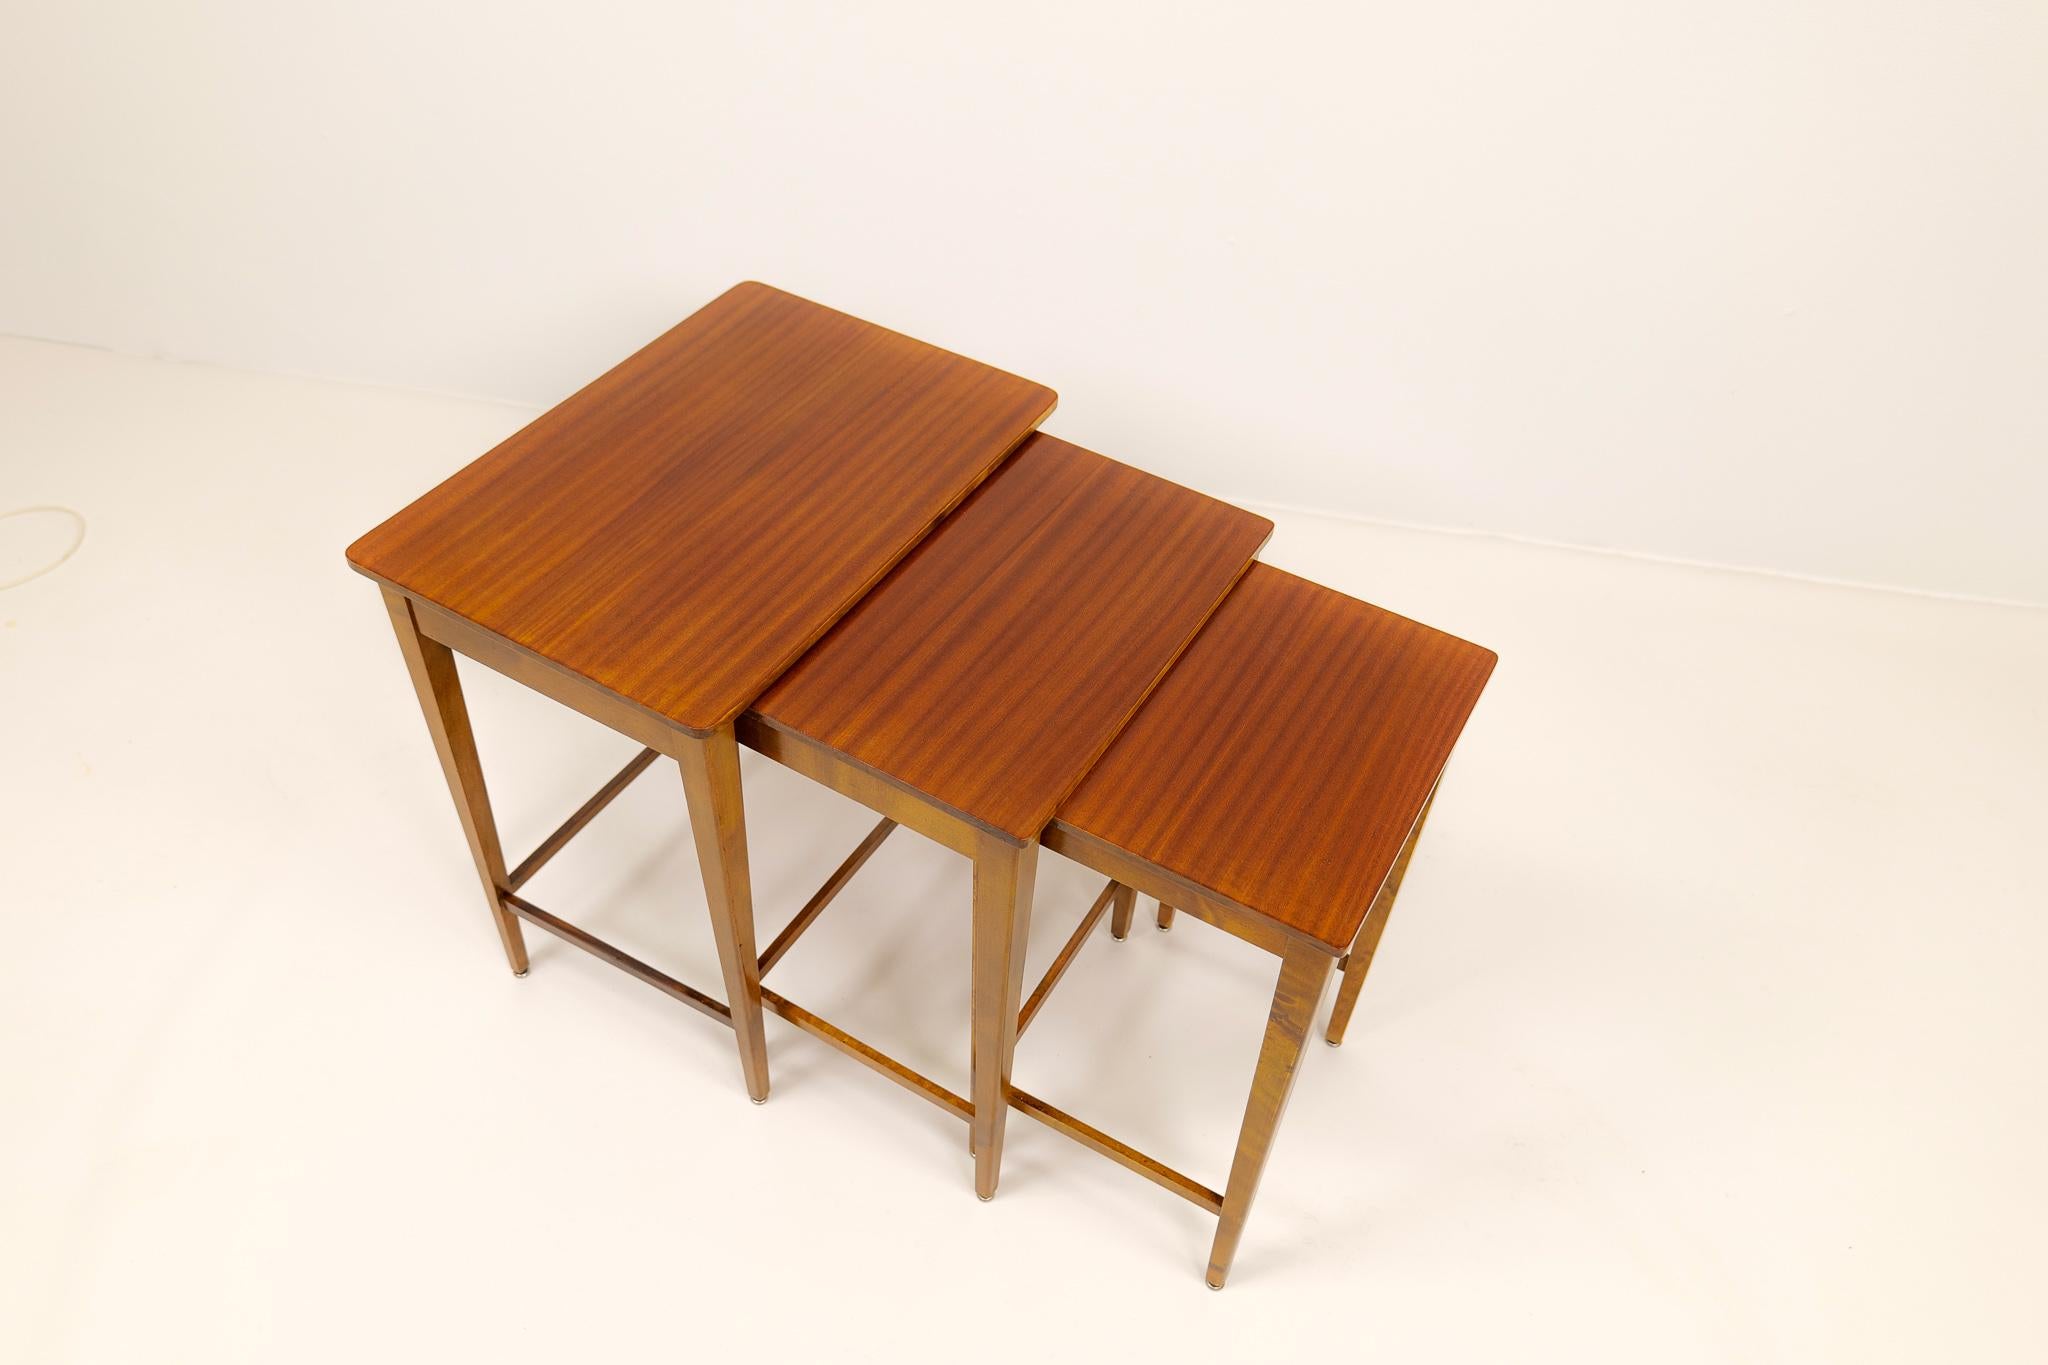 Art Deco Nesting Tables Mahogany and Stained Birch, NK Sweden, 1940s For Sale 1